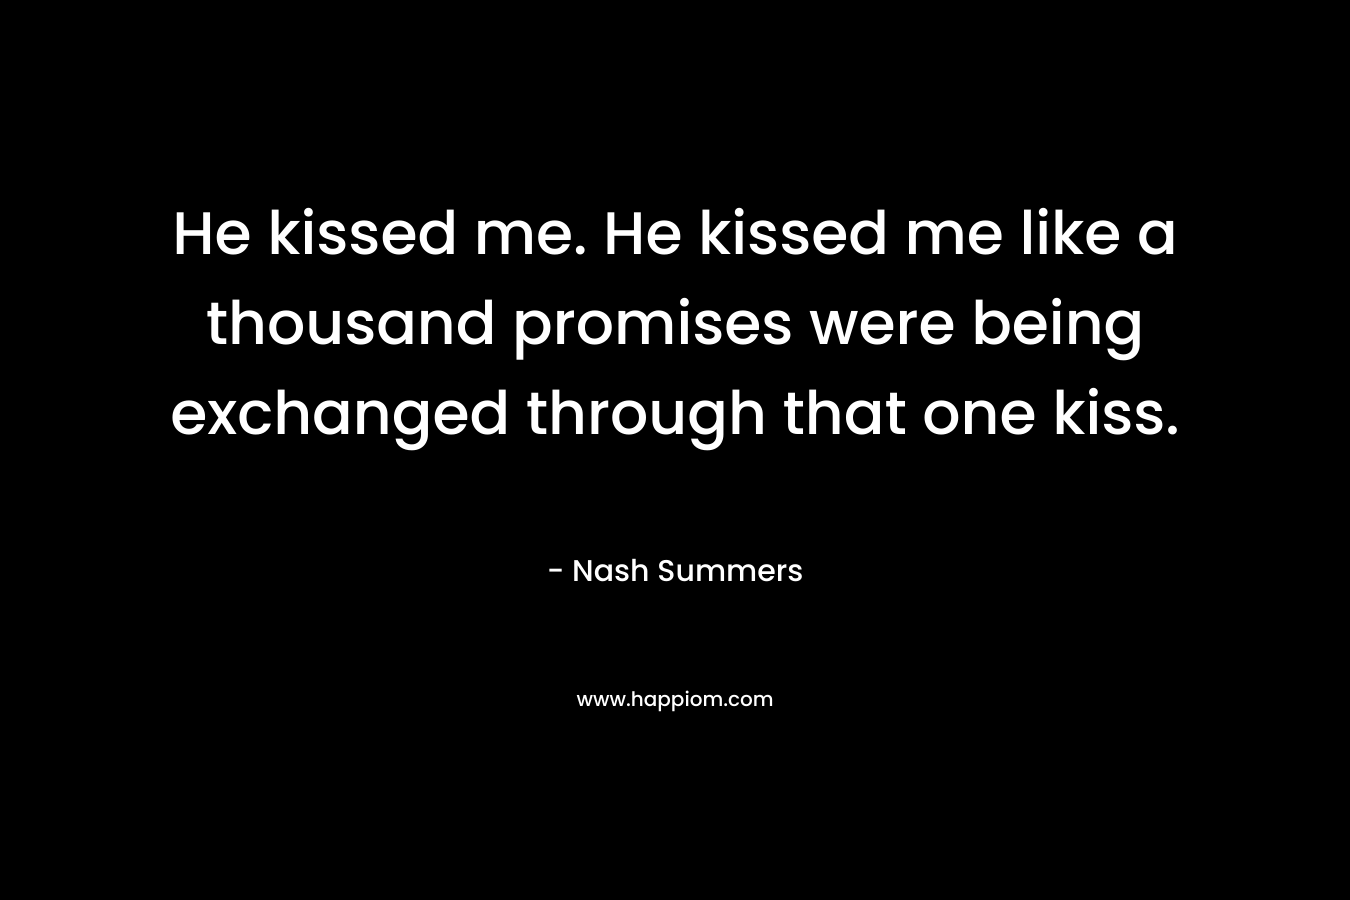 He kissed me. He kissed me like a thousand promises were being exchanged through that one kiss.